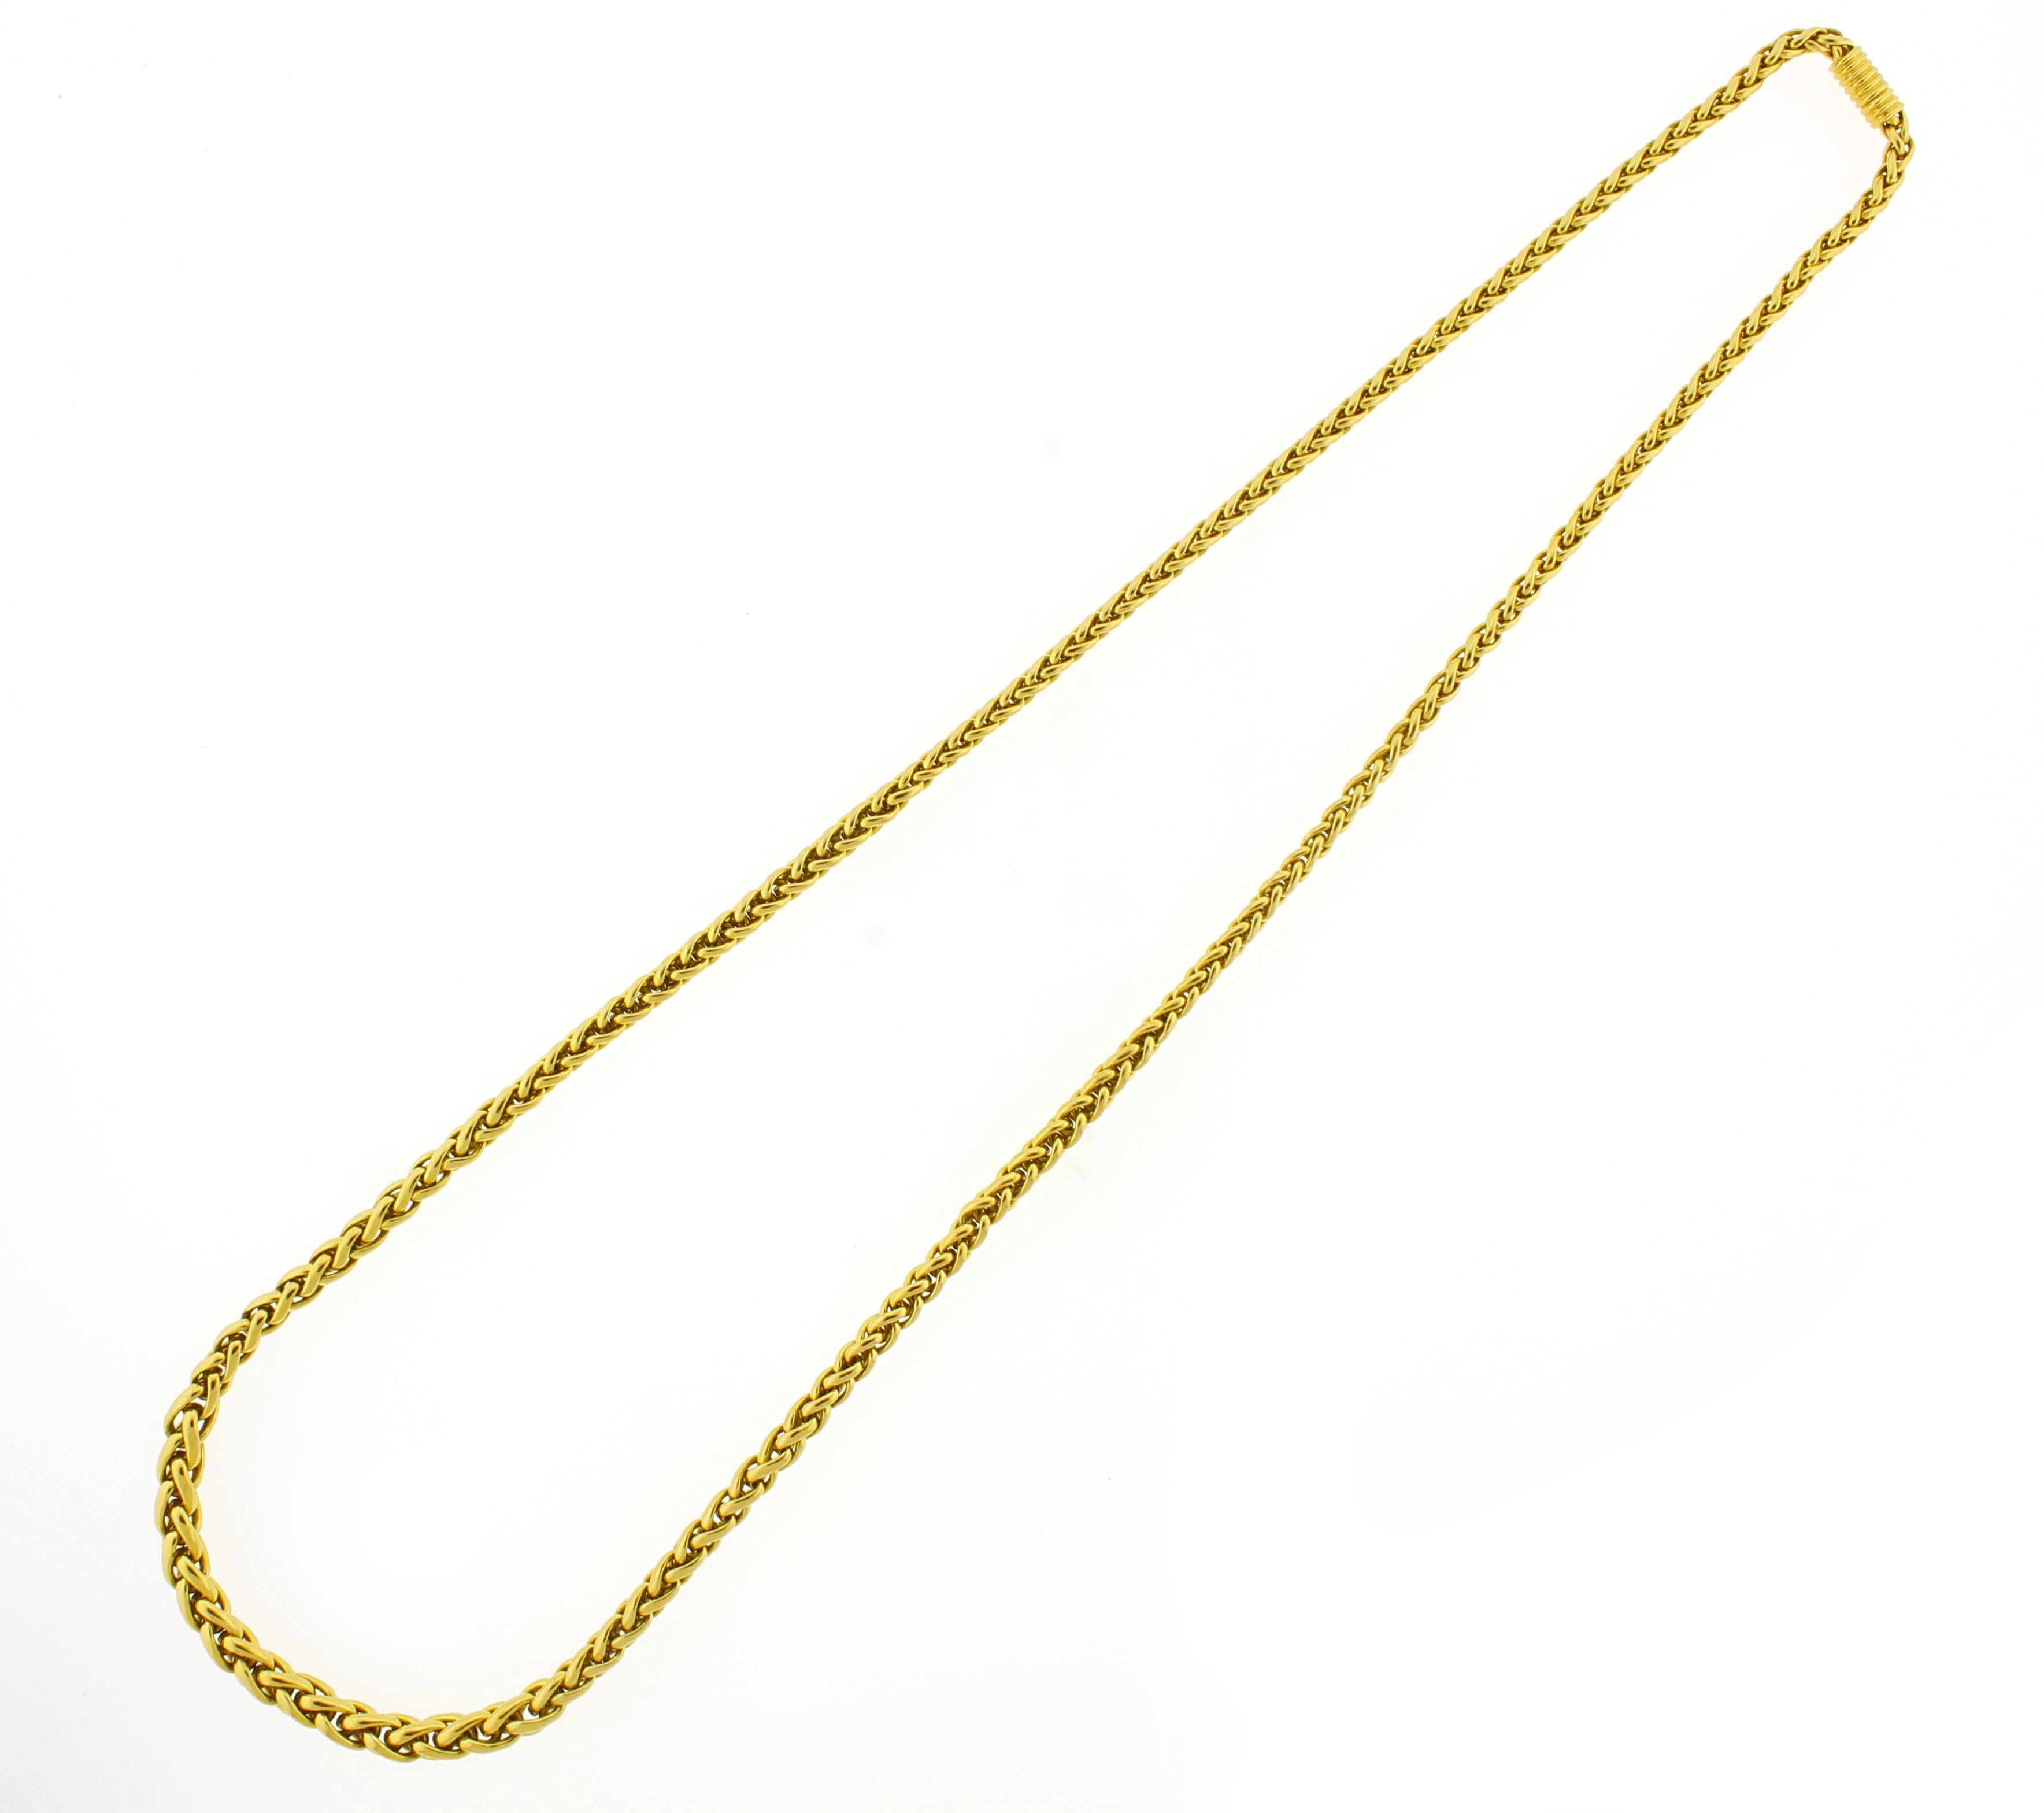 From Italian Jeweler Bulgari, a 27 inch graduated wheat link bracelet. The 18 karat yellow gold necklace graduates from 6mm to 4mm.  94 grams